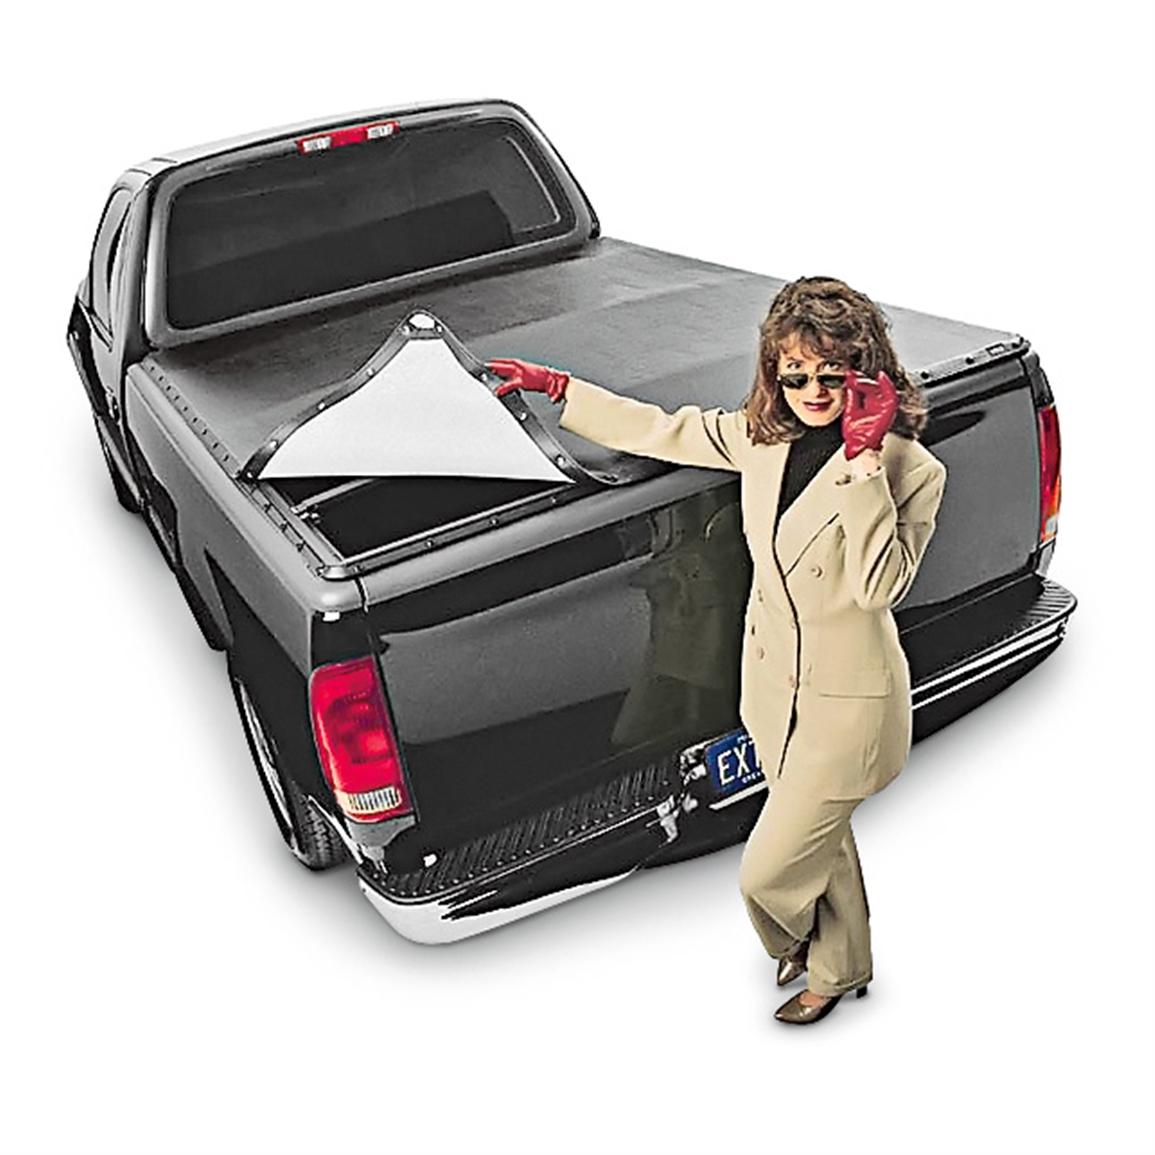 Extang Blackmax Tonneau Cover 162798 Accessories At Sportsman39s Guide